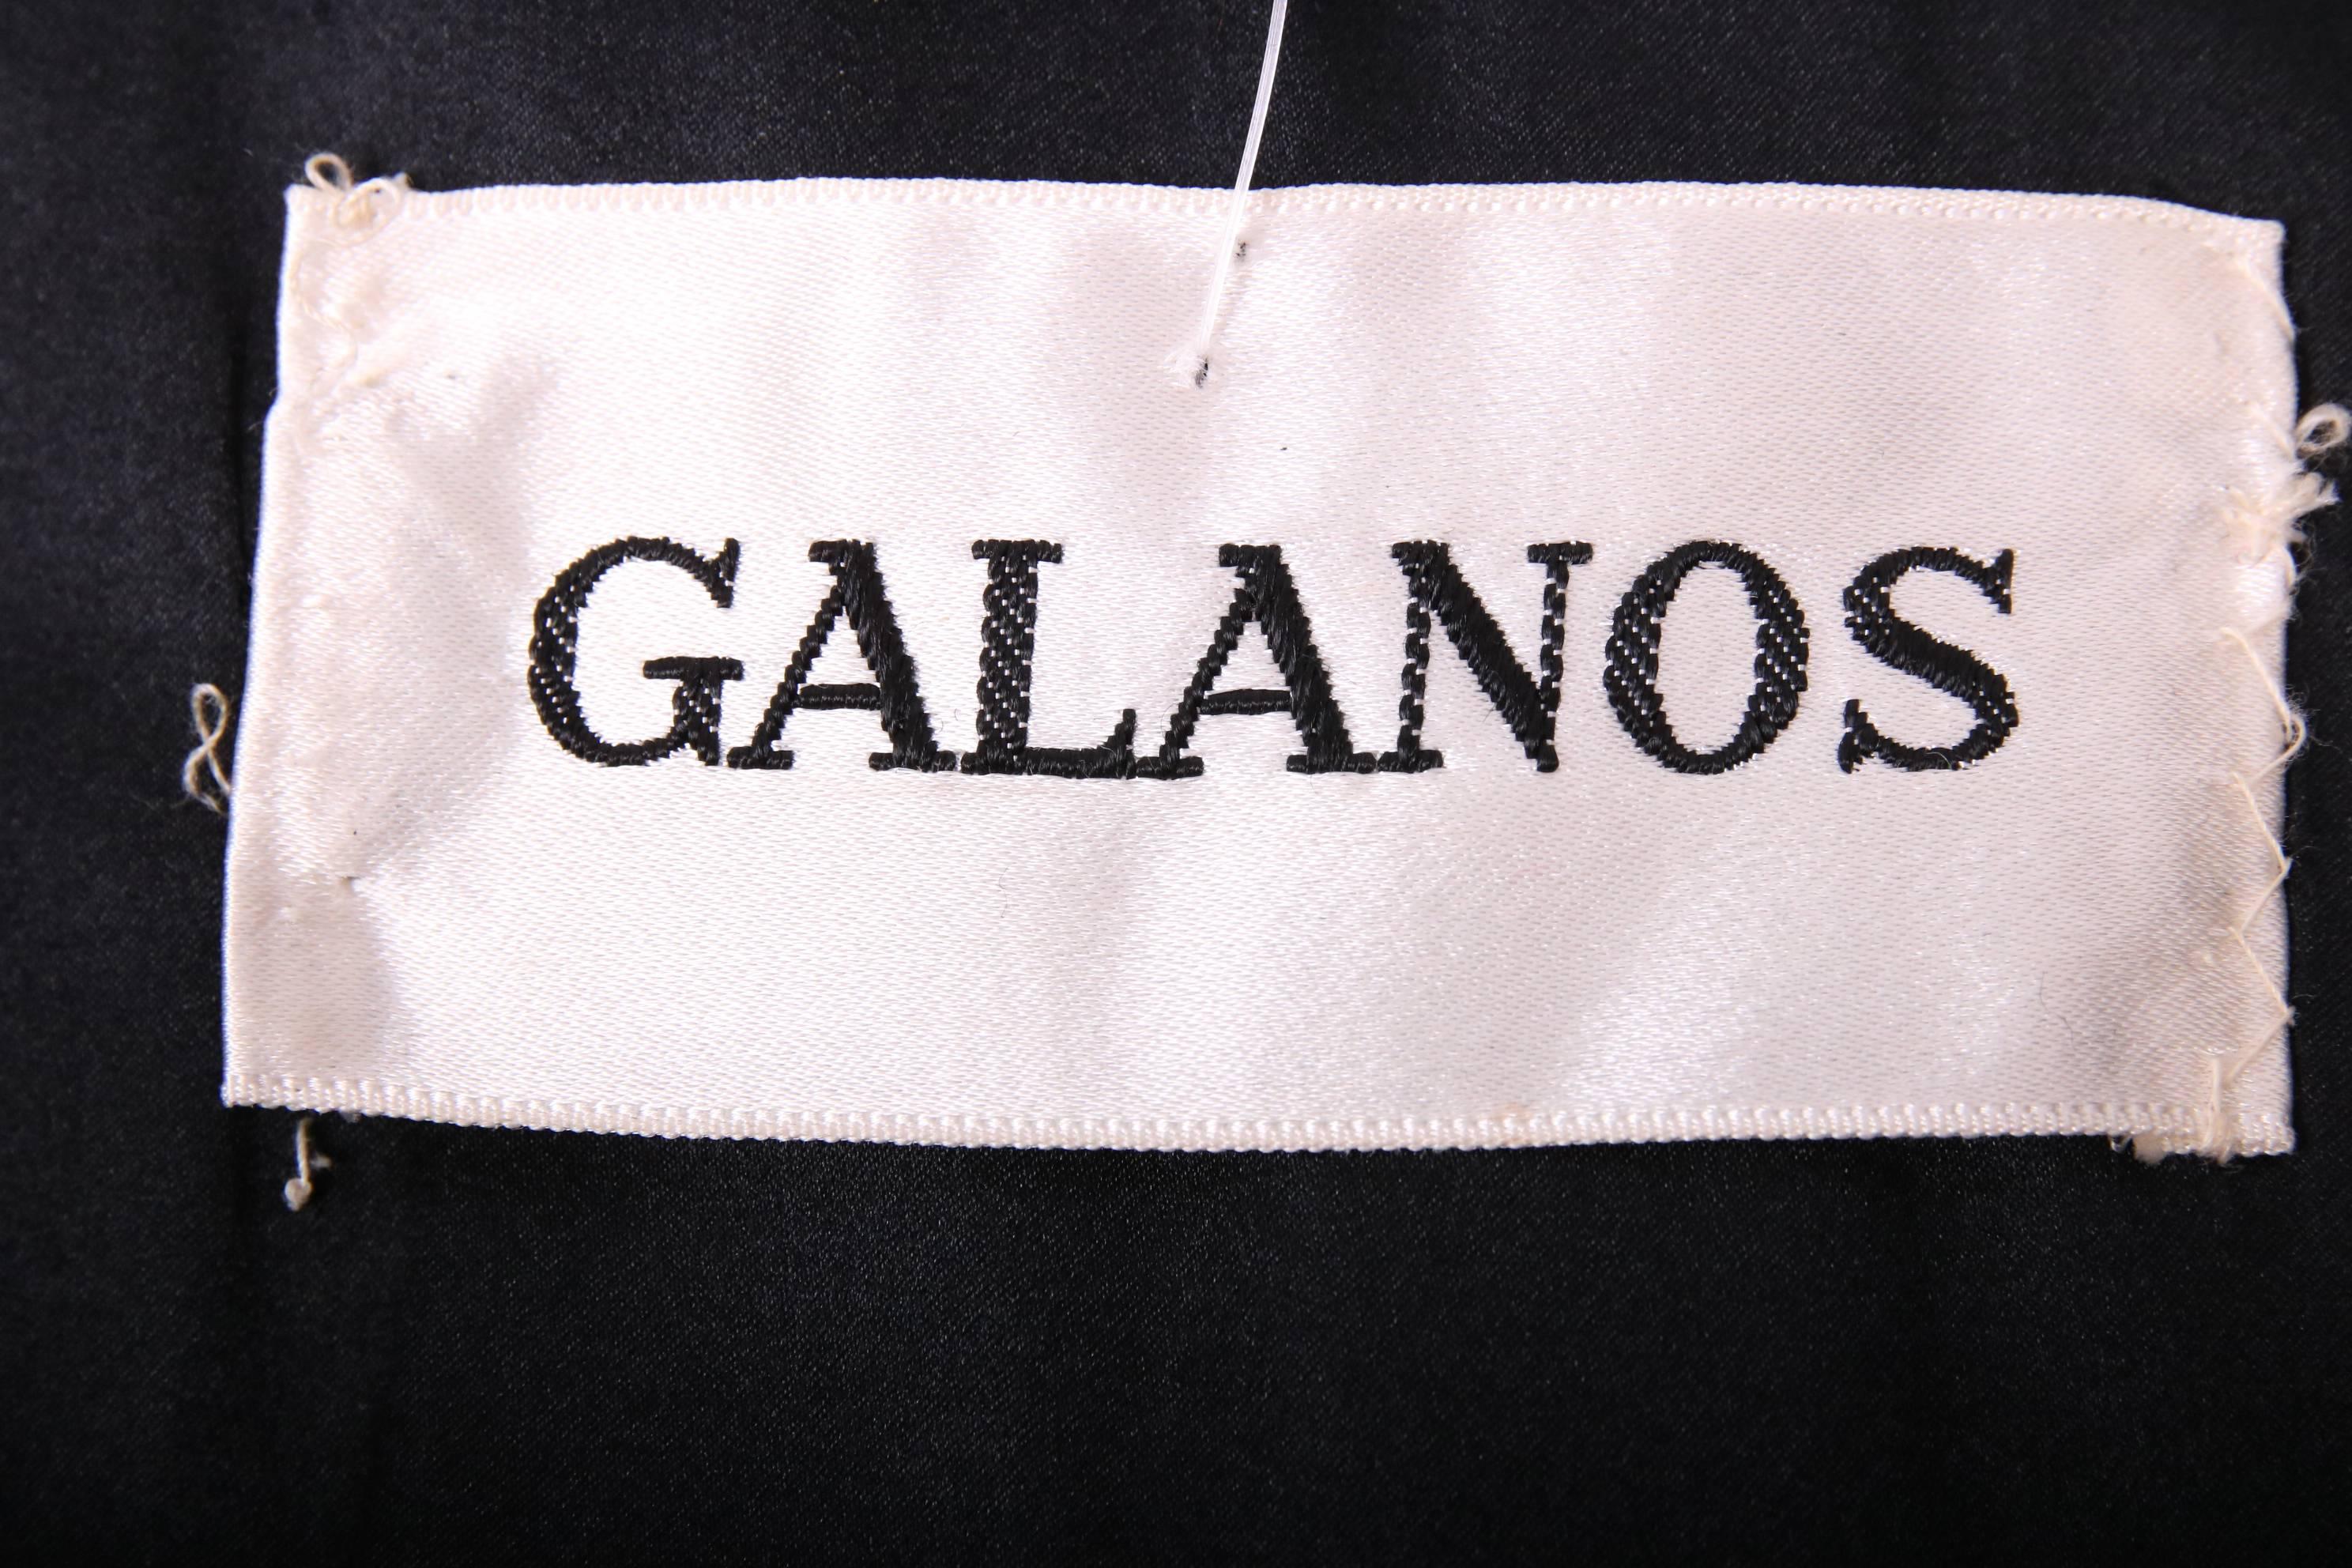 Vintage Galanos black melton wool cape with quilted detail at neckline and button closure also at neck. Cape hangs straight off the shoulder with no pockets or armholes. In excellent condition. No size tag - will fit a wide range of sizes.